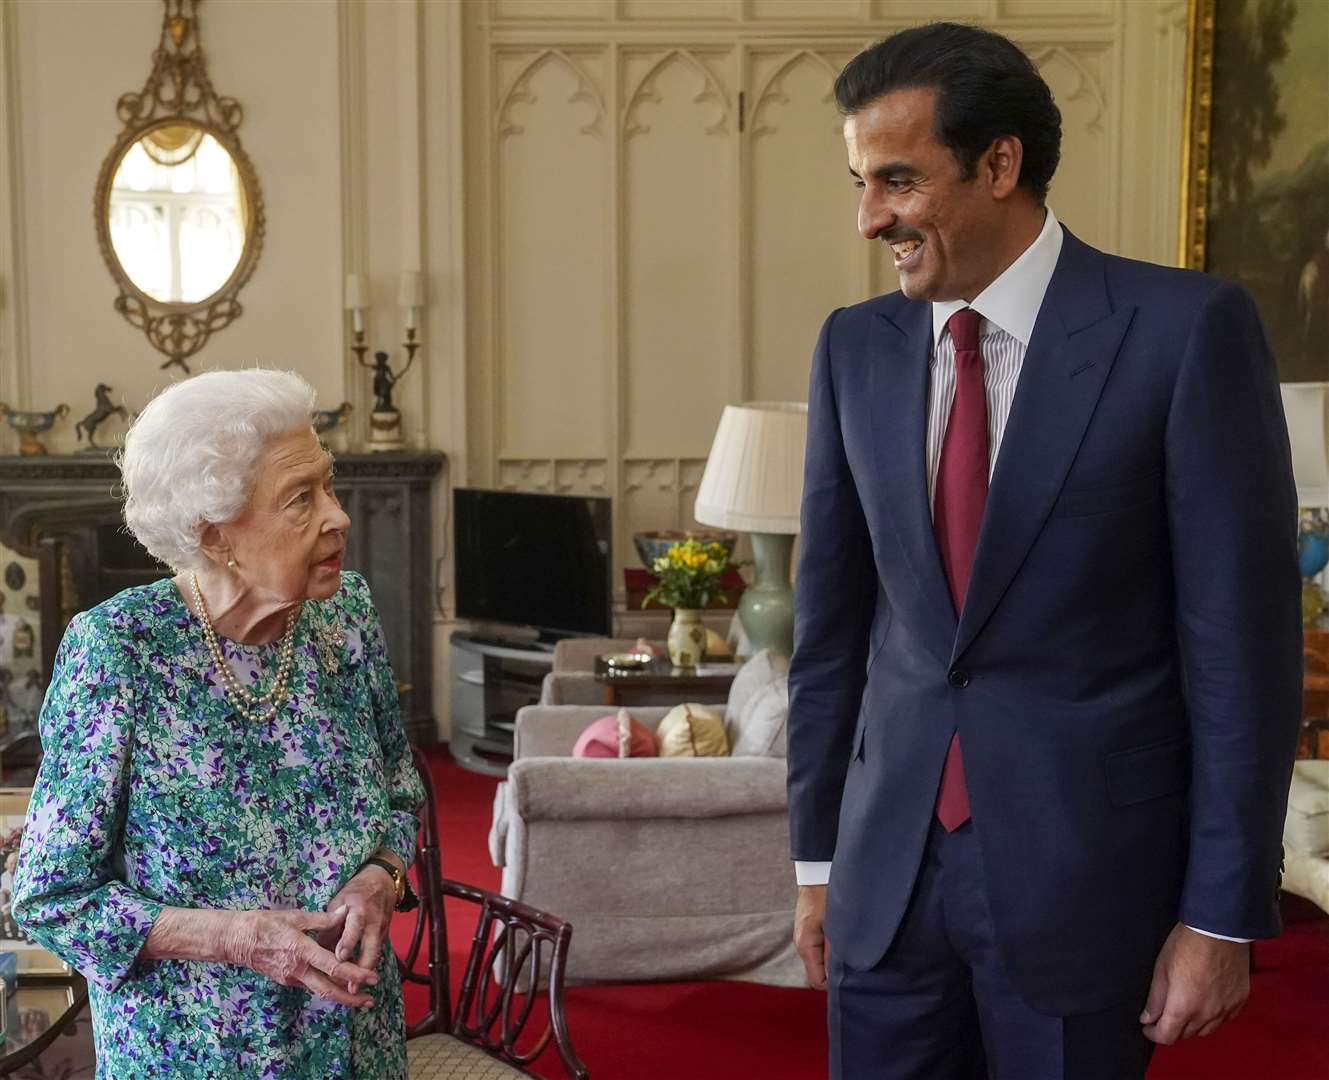 The monarch chatting with the Emir of Qatar, Sheikh Tamim bin Hamad Al Thani at Windsor Castle (Steve Parsons/PA)